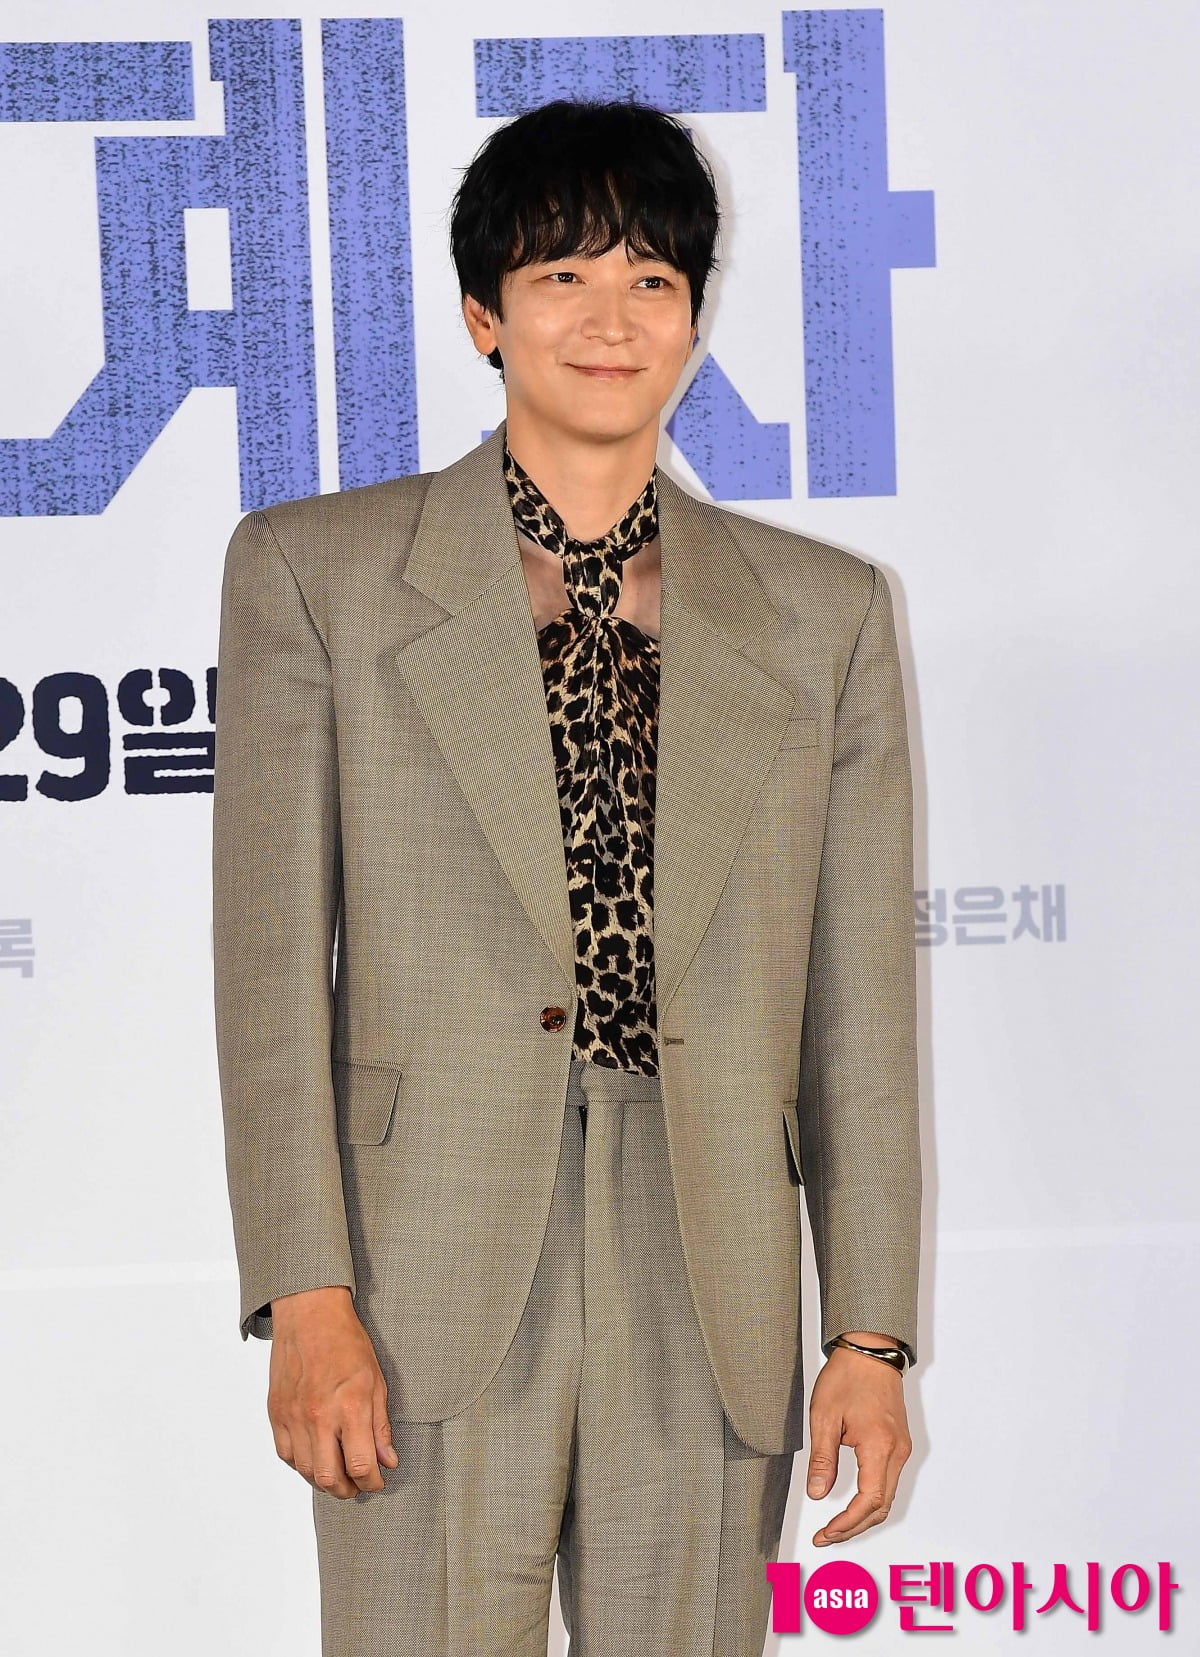 Kang Dong-won is confident that the movie 'The Plot' will be a box office hit.